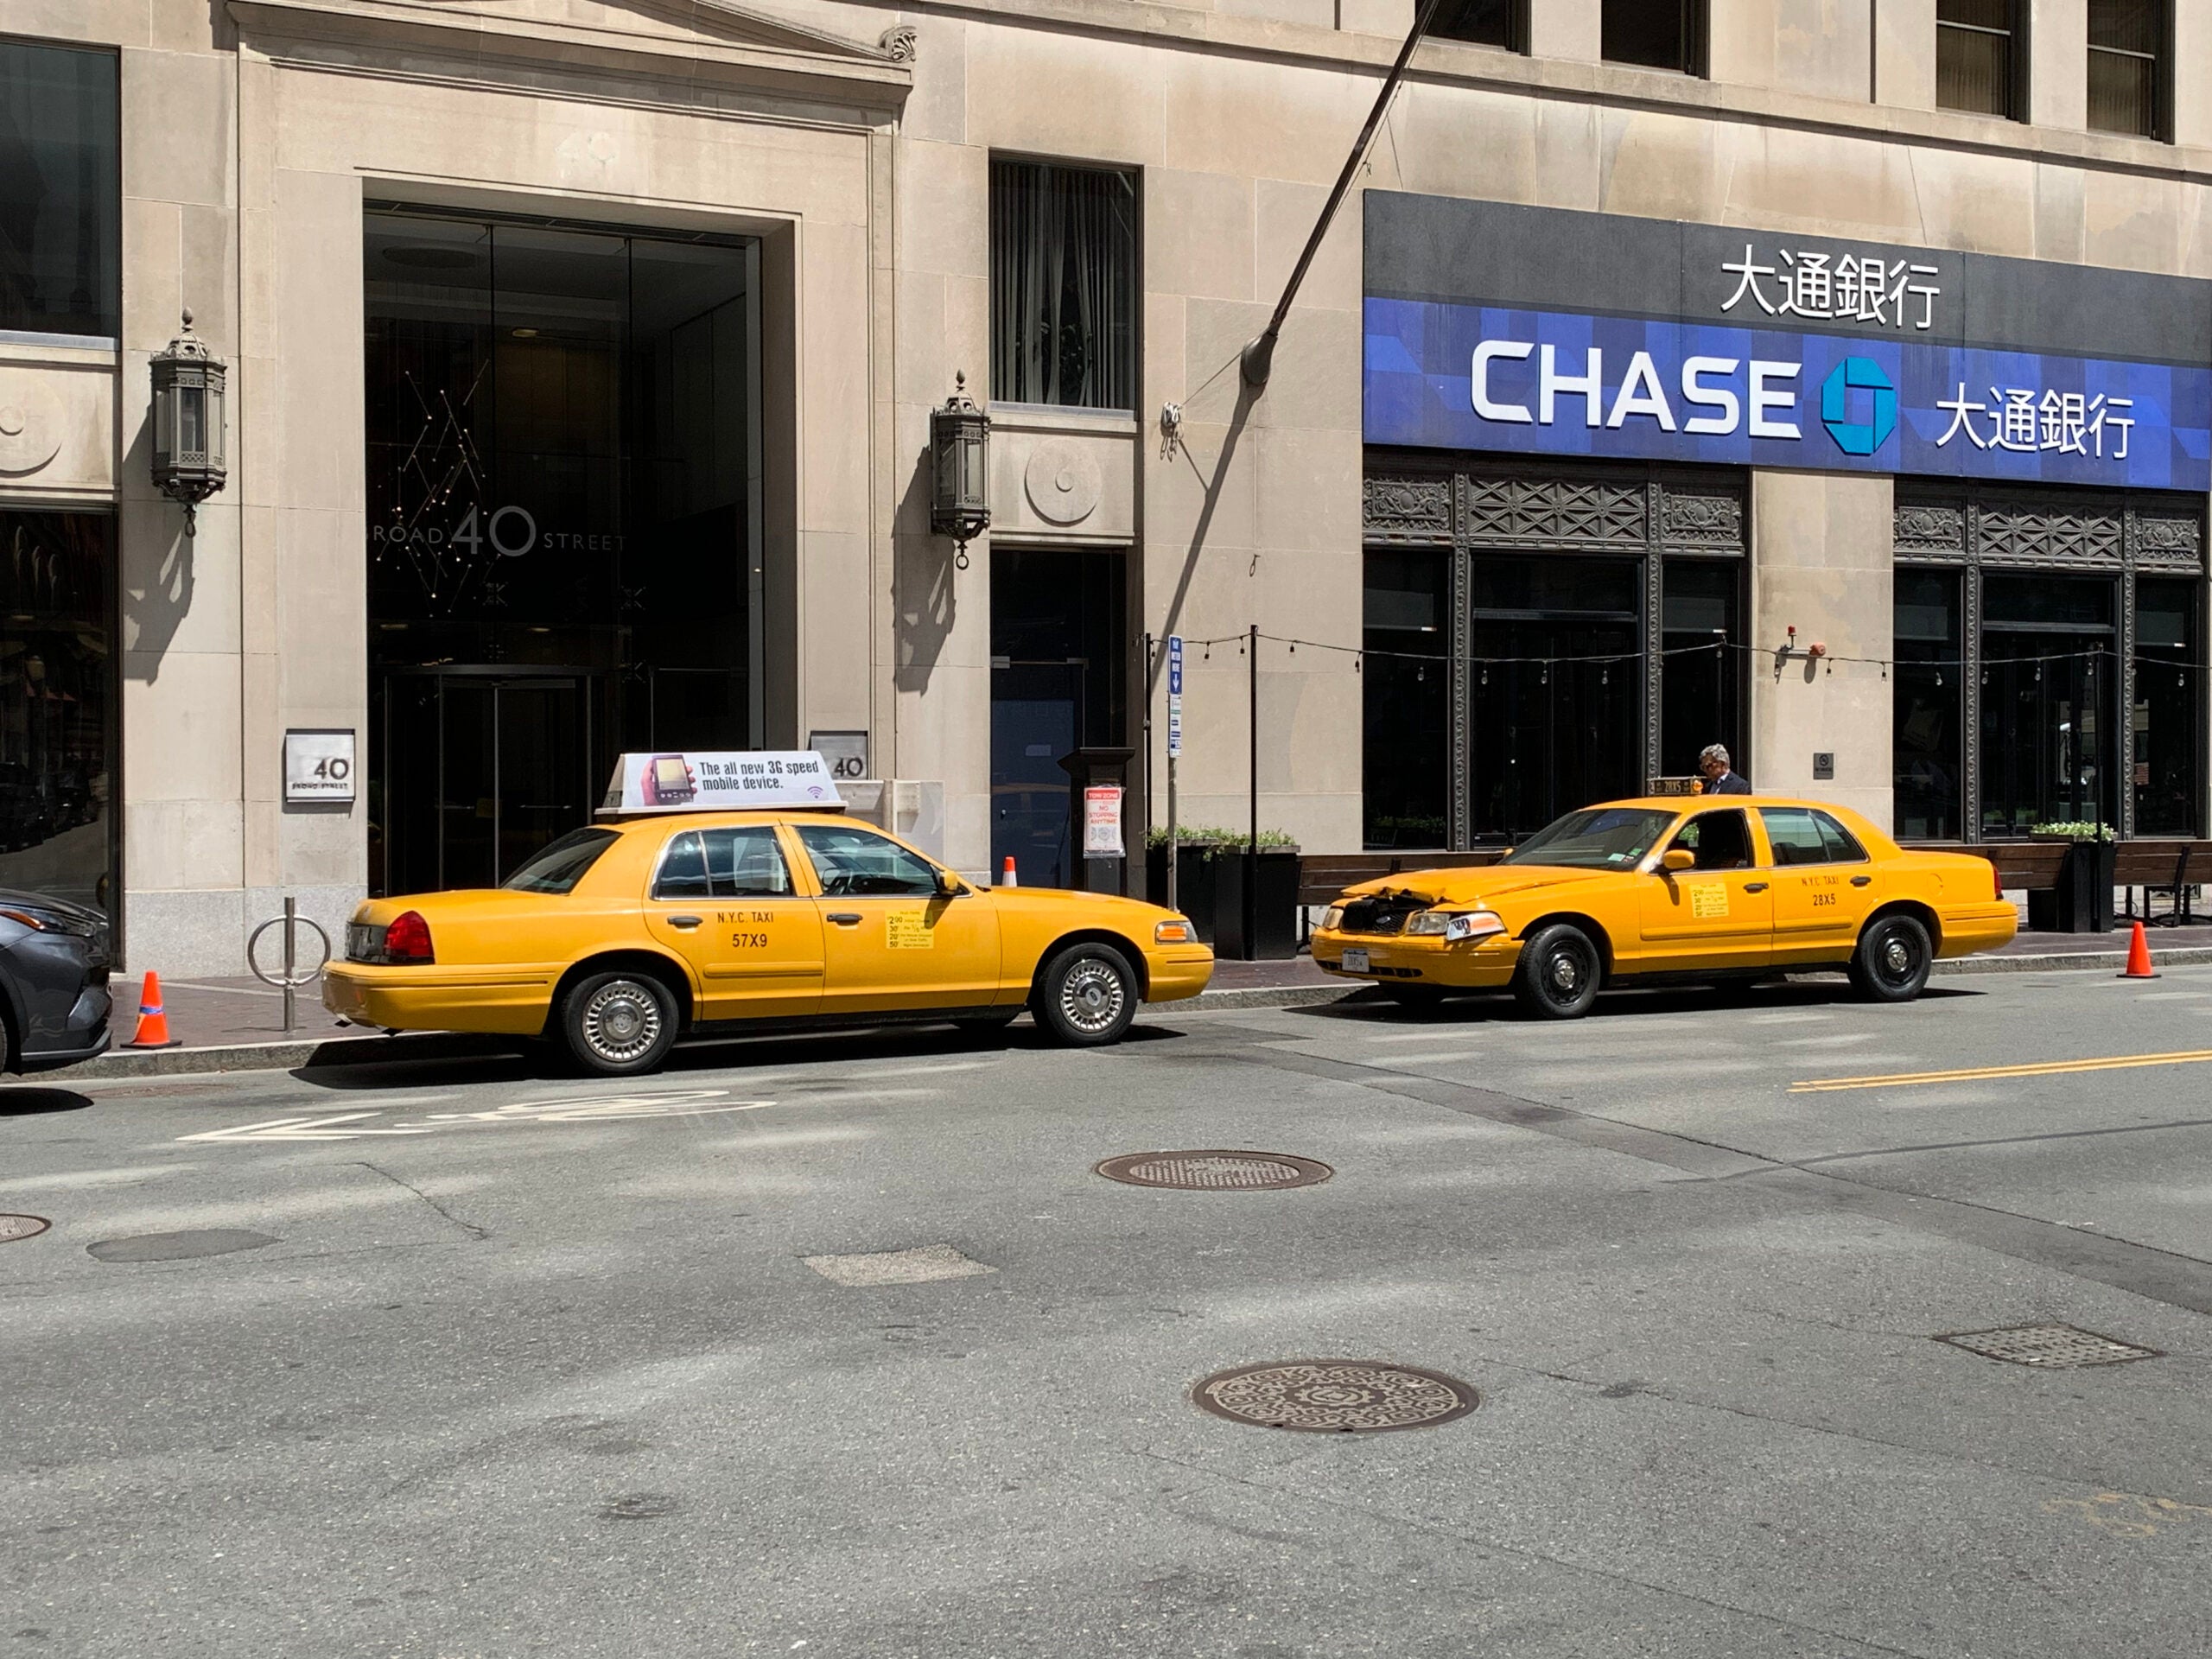 Two taxi cabs being used for filming the upcoming Sony-Marvel movie "Madame Web," which is currently filming in the Boston area through September.